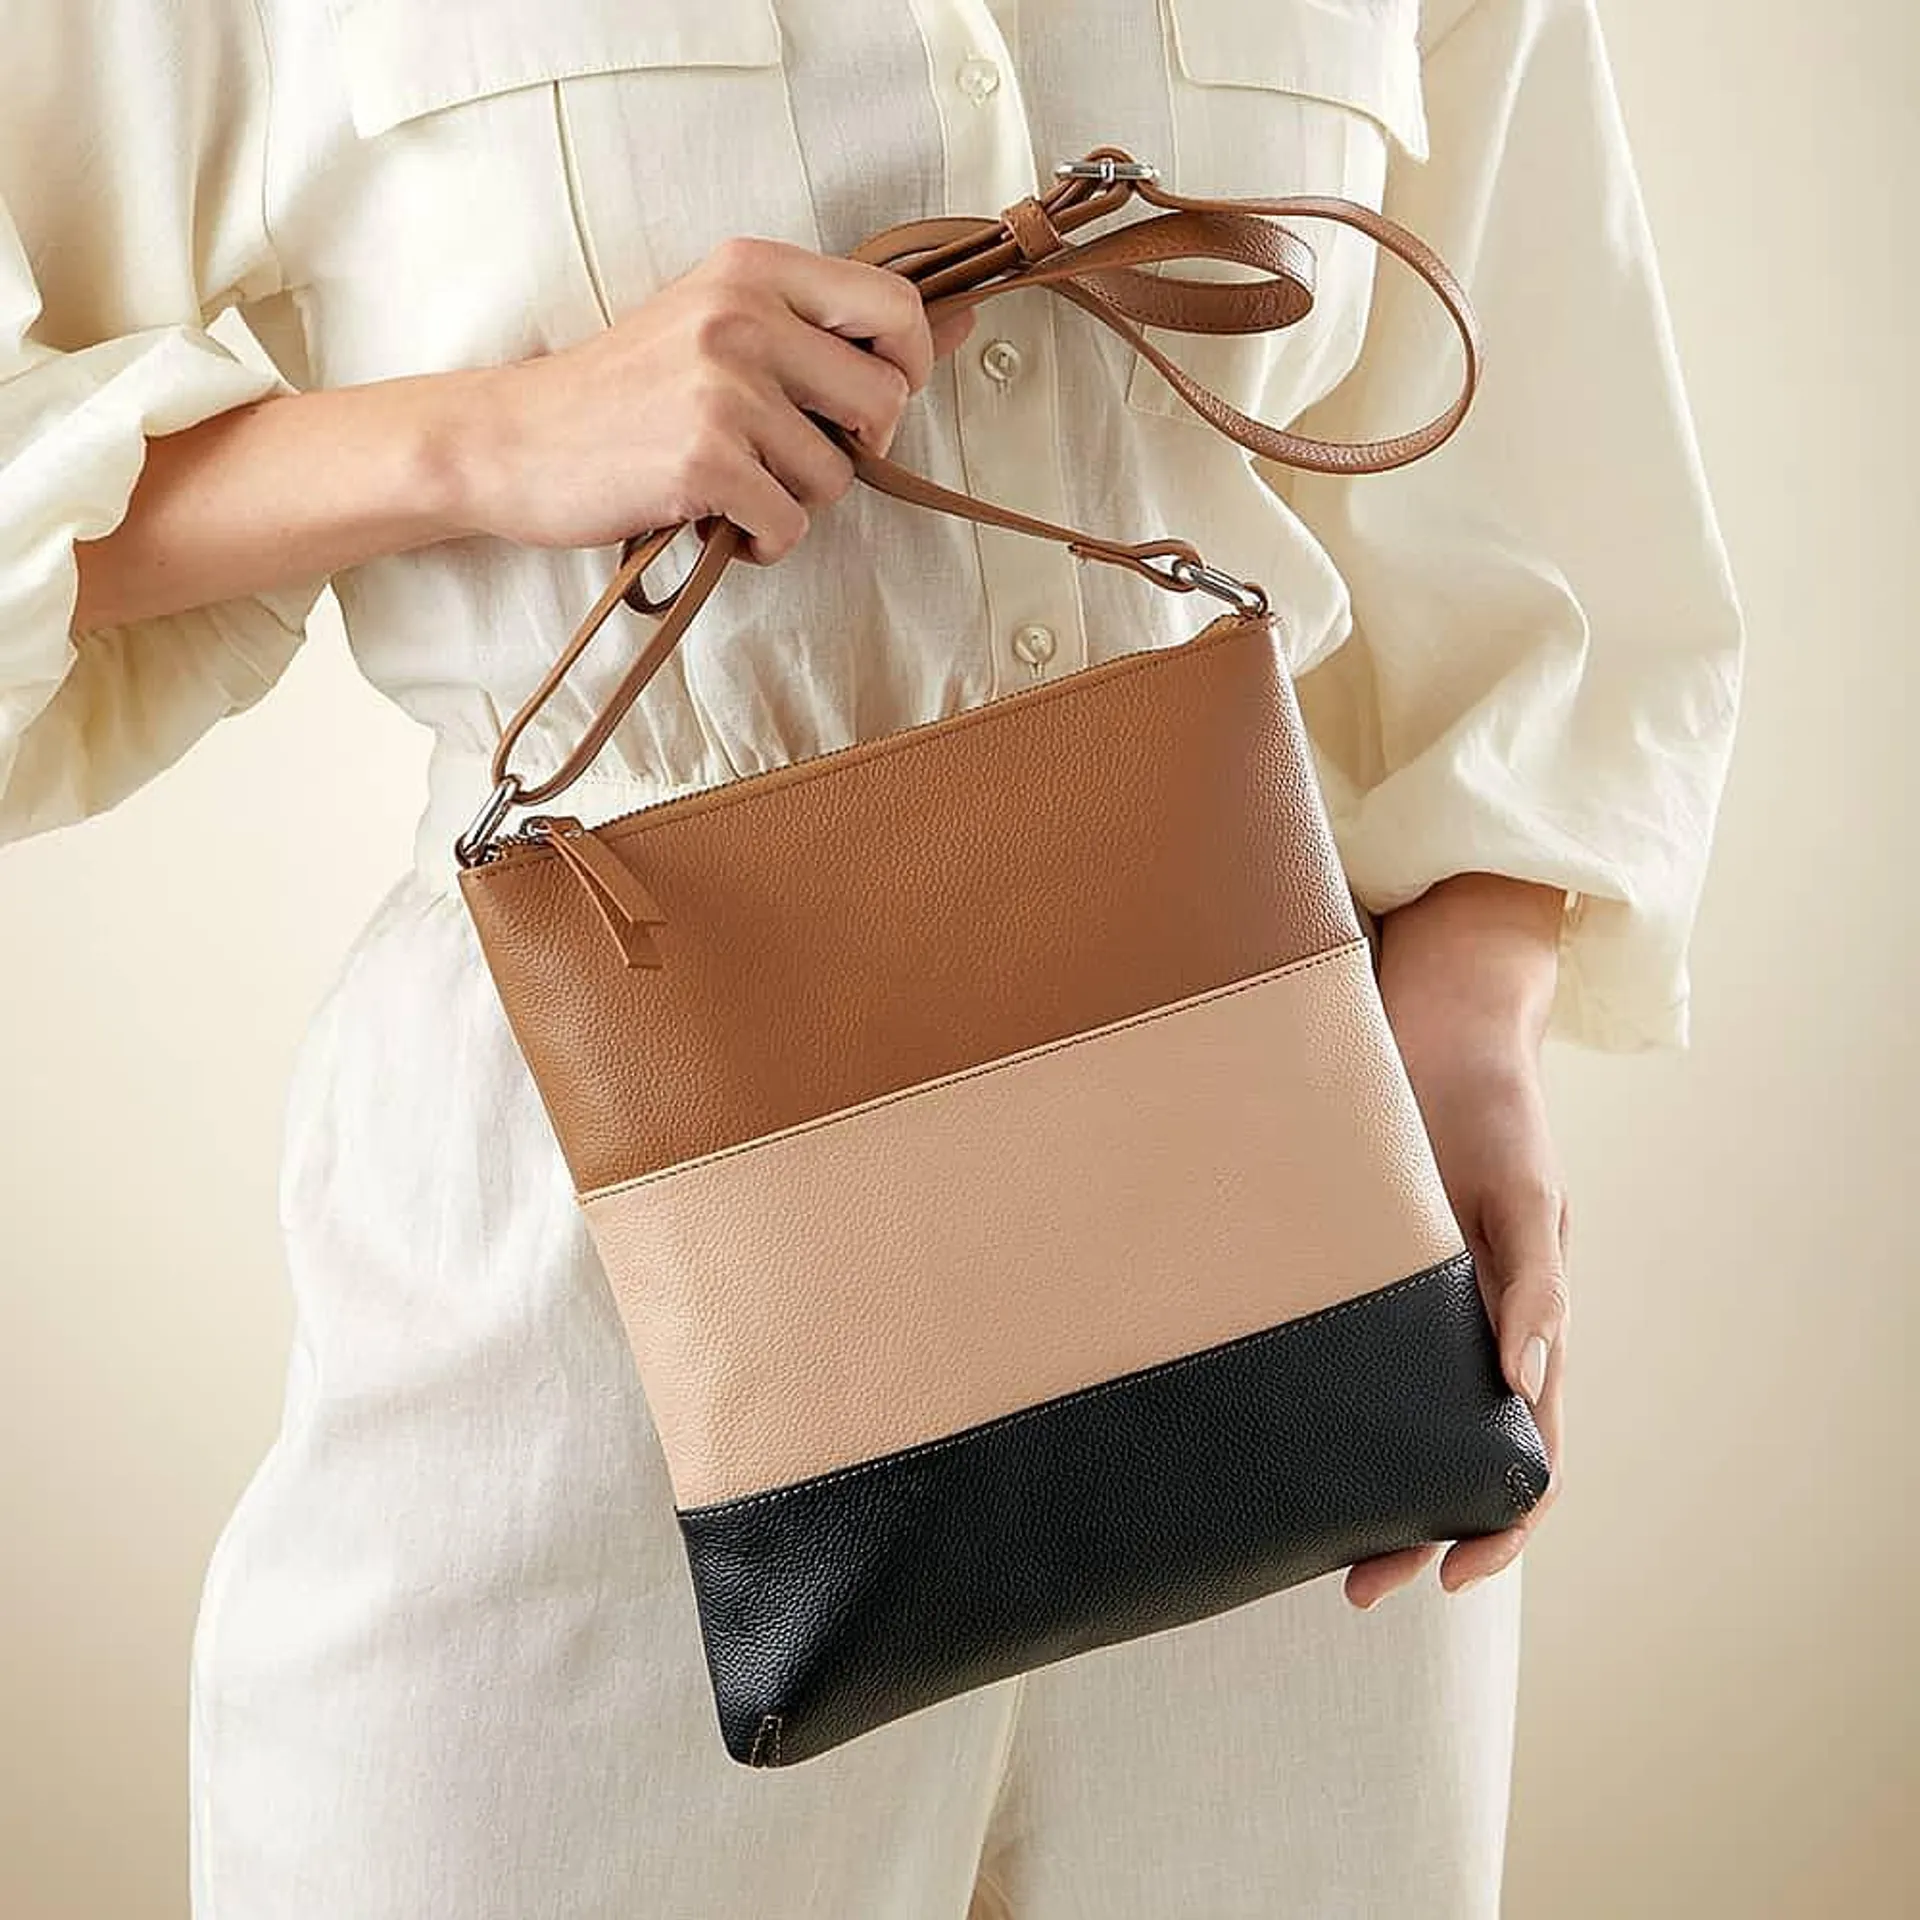 Shades of Chic Leather Cross-Body Bag